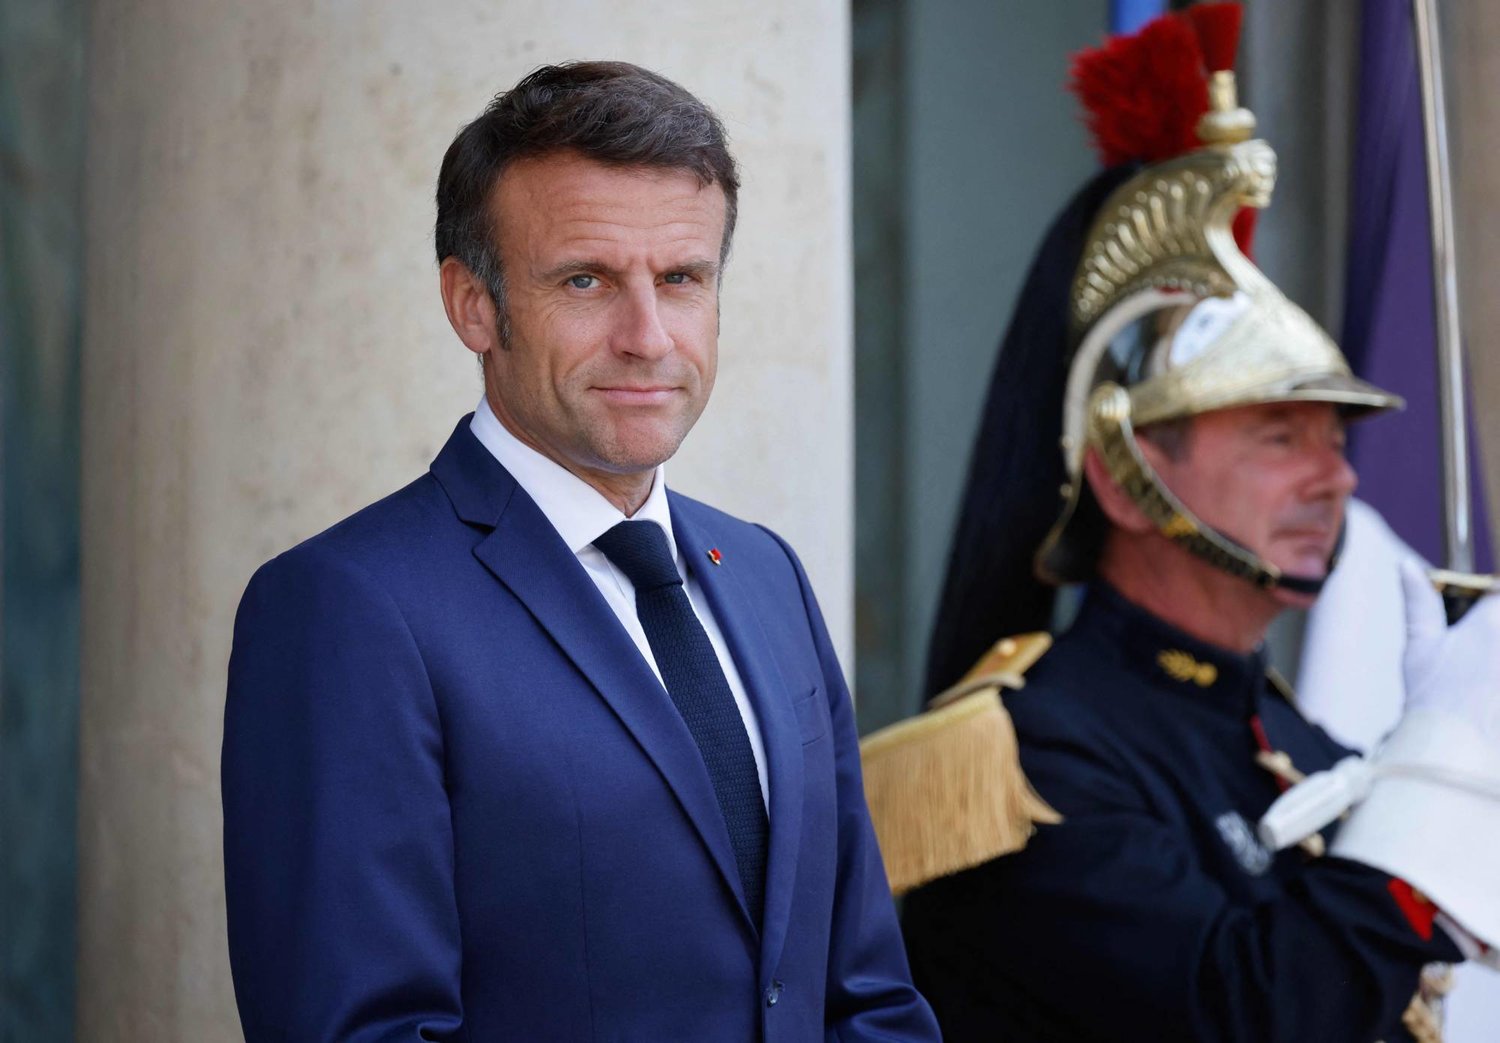 France's President Emmanuel Macron awaits the arrival of Madagascar's President for a meeting at the Elysee Palace in Paris, on June 9, 2023. (Photo by Ludovic MARIN / AFP)